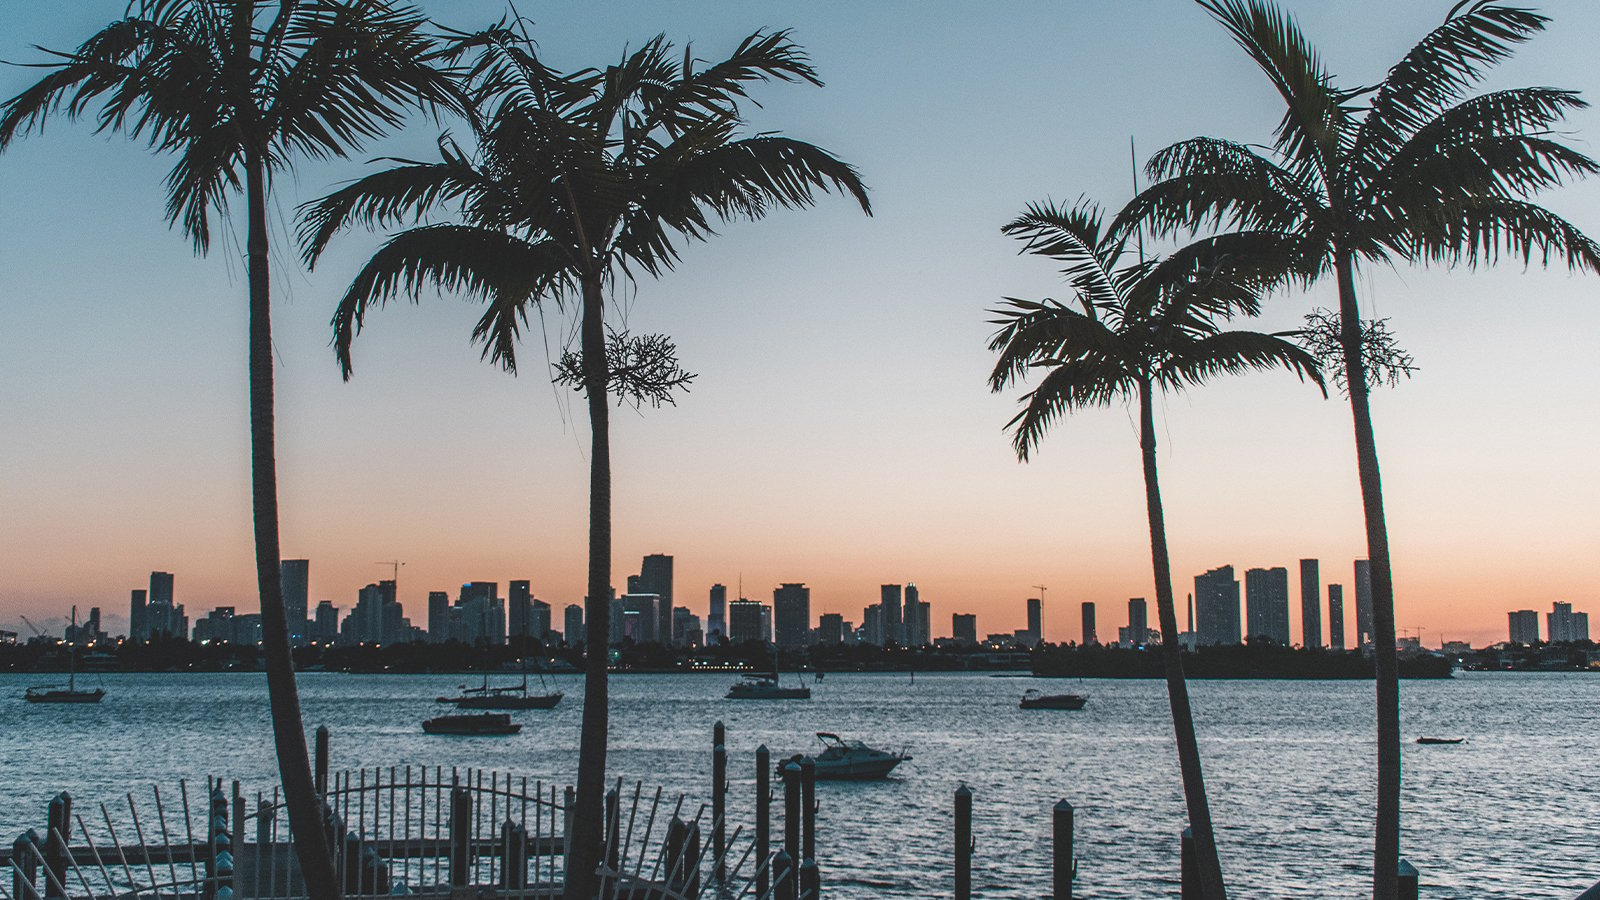 A distant view of the Miami skyline at sunset with palm trees in the foreground.